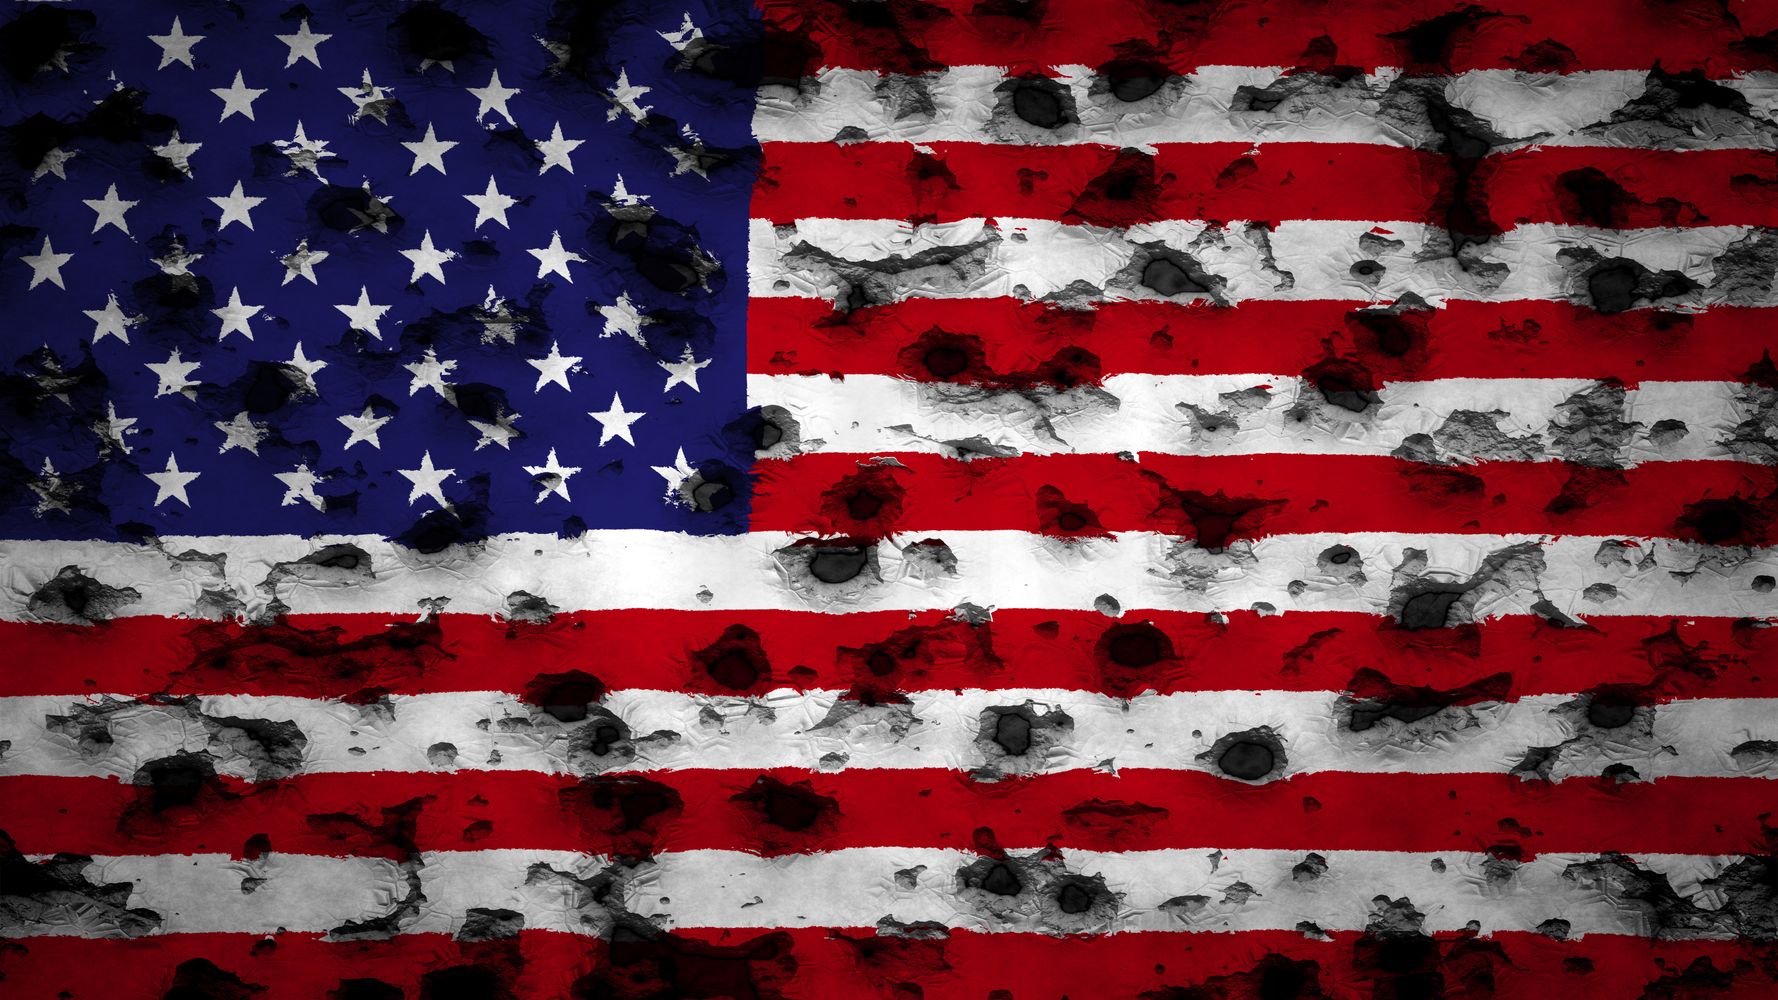 Is The War On Terror Actually A War At All - Or Is It Only A Metaphor? 